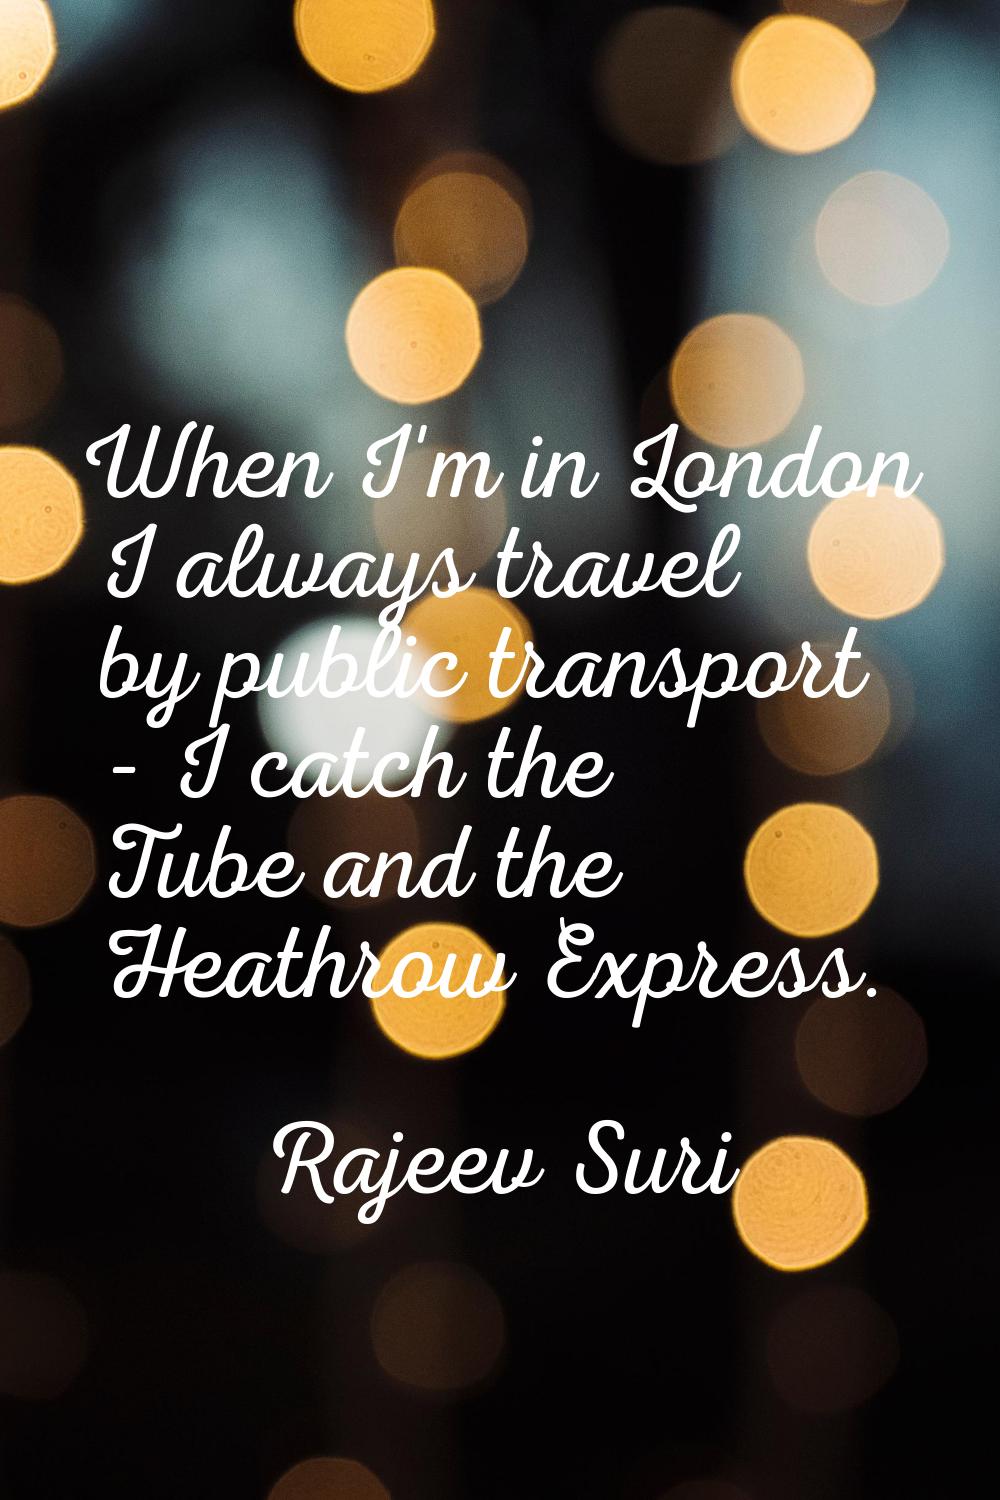 When I'm in London I always travel by public transport - I catch the Tube and the Heathrow Express.